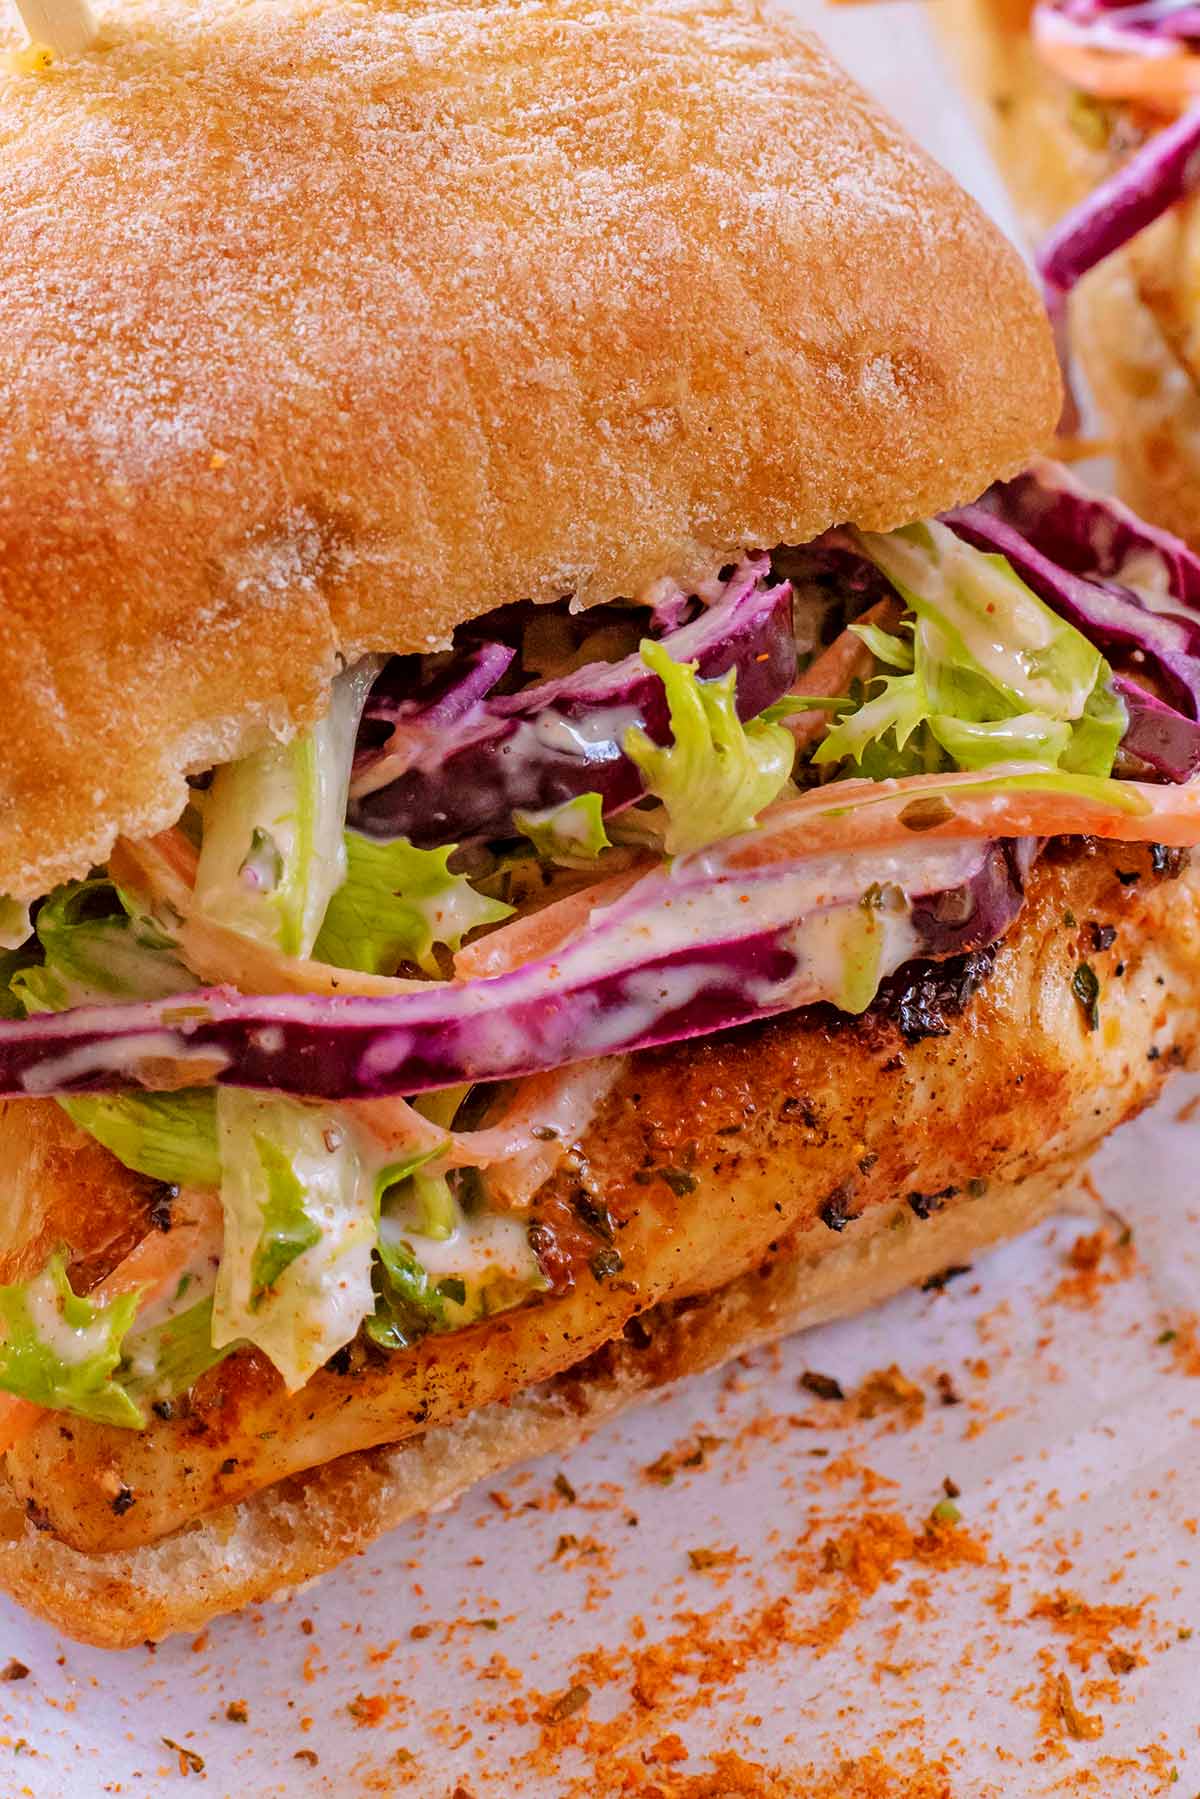 A ciabatta roll with cajun spiced chicken and slaw in it.